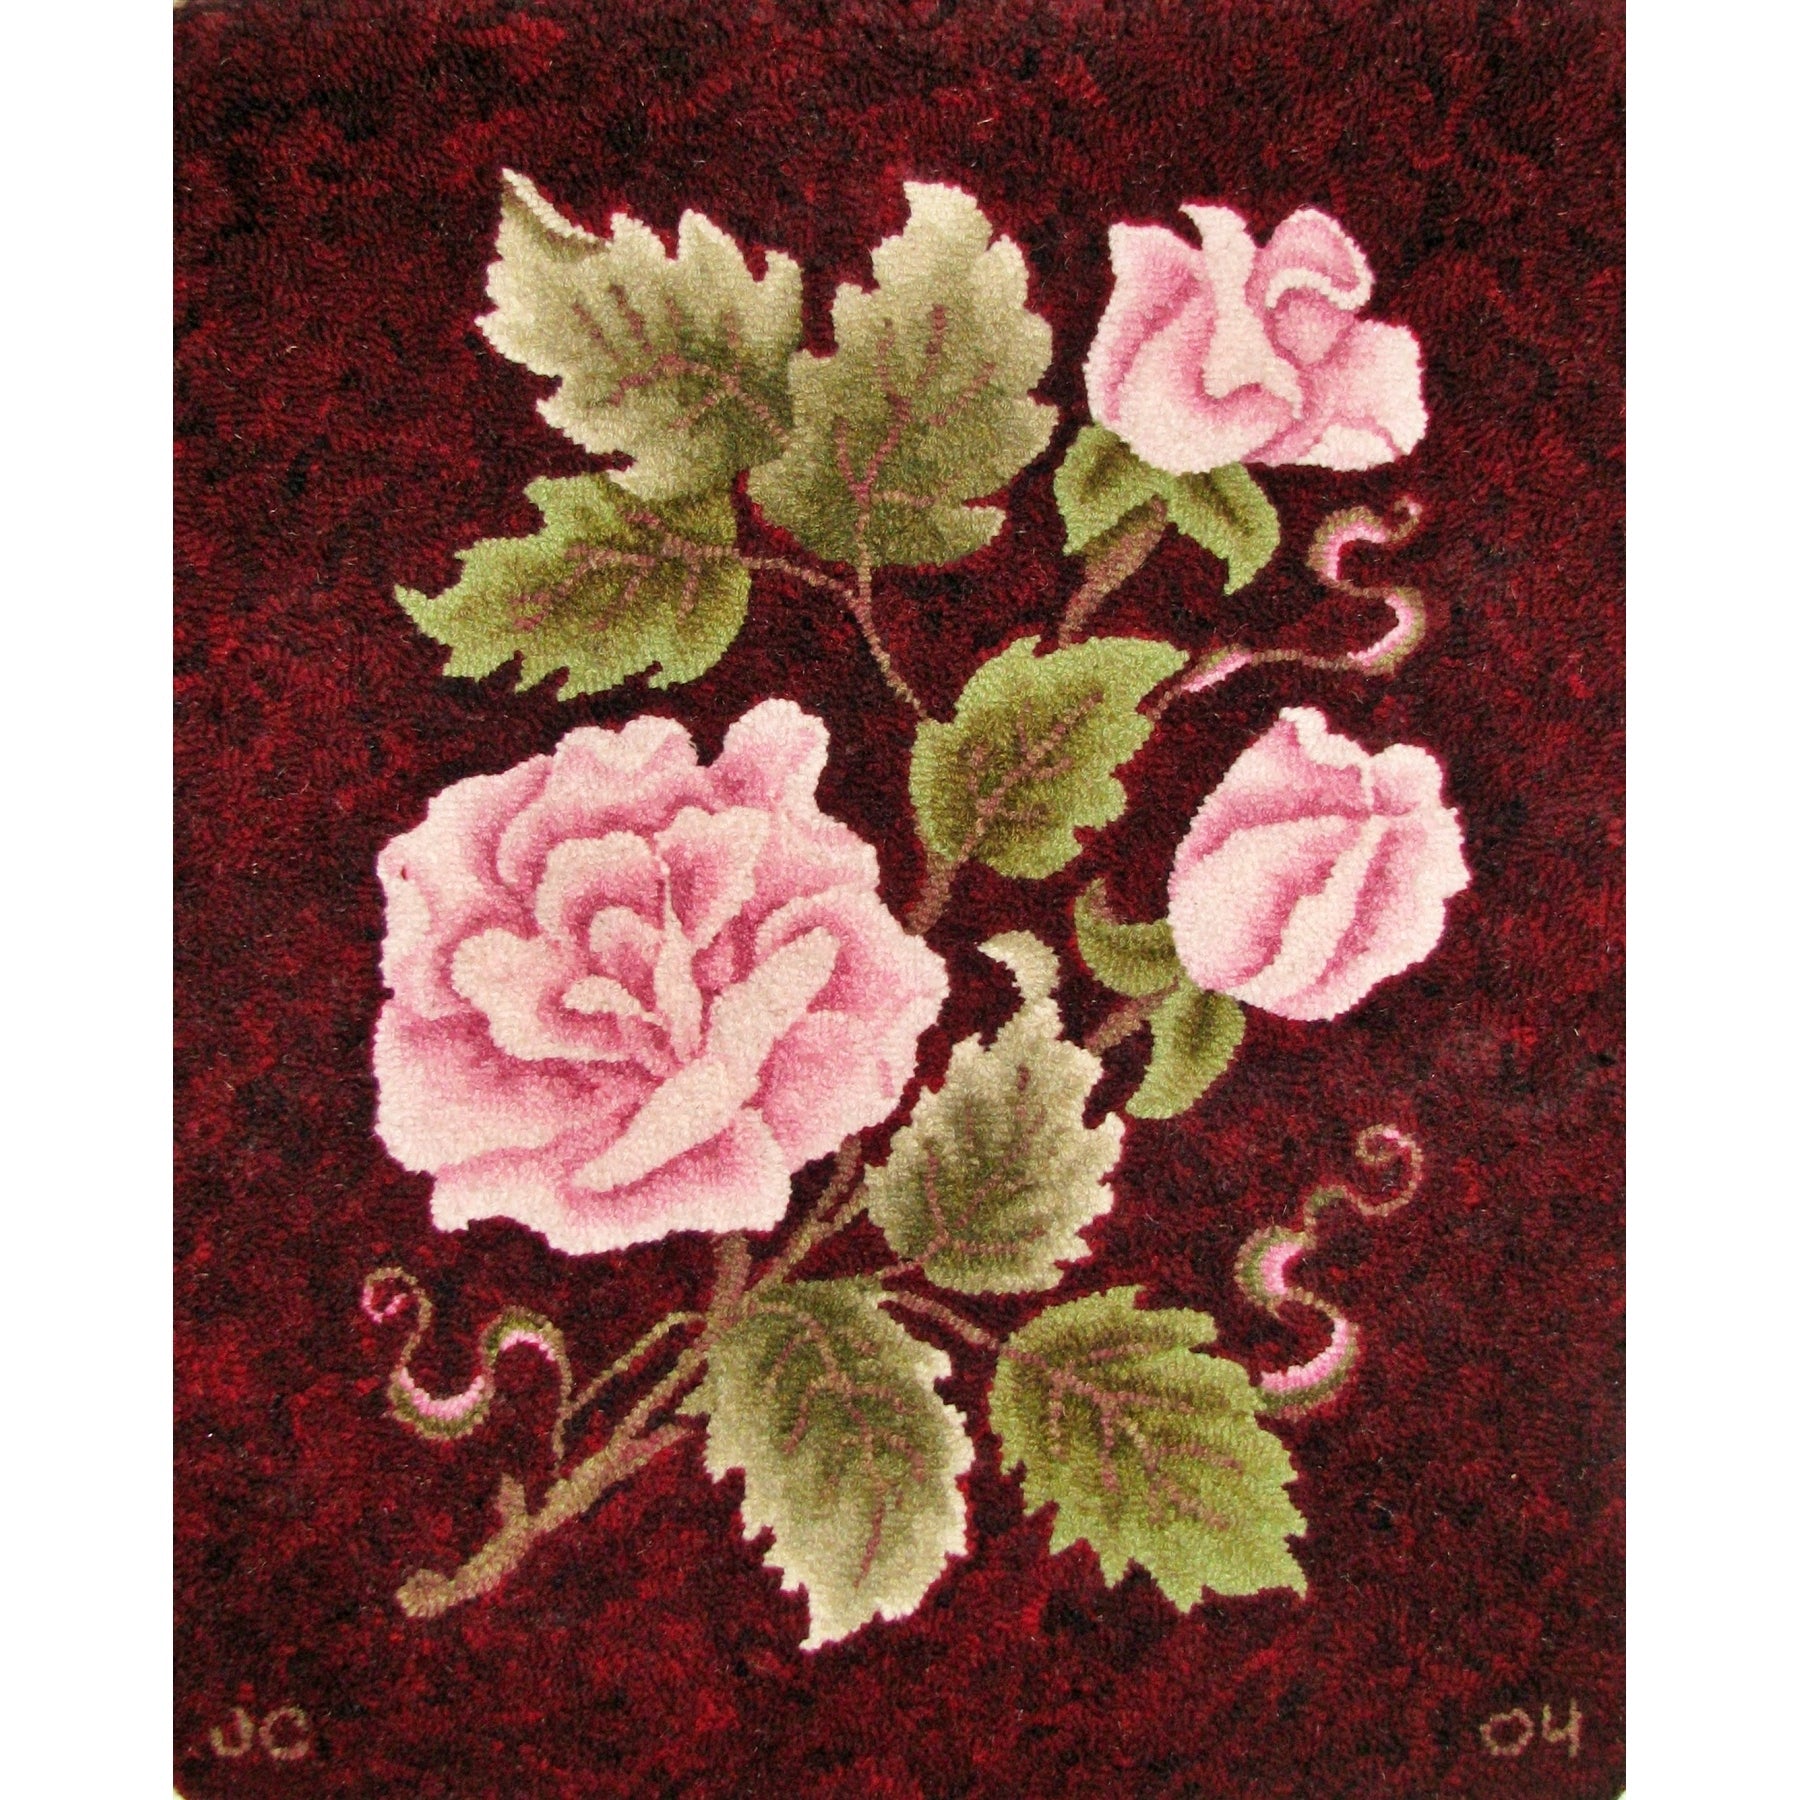 Roses, rug hooked by Judy Carter